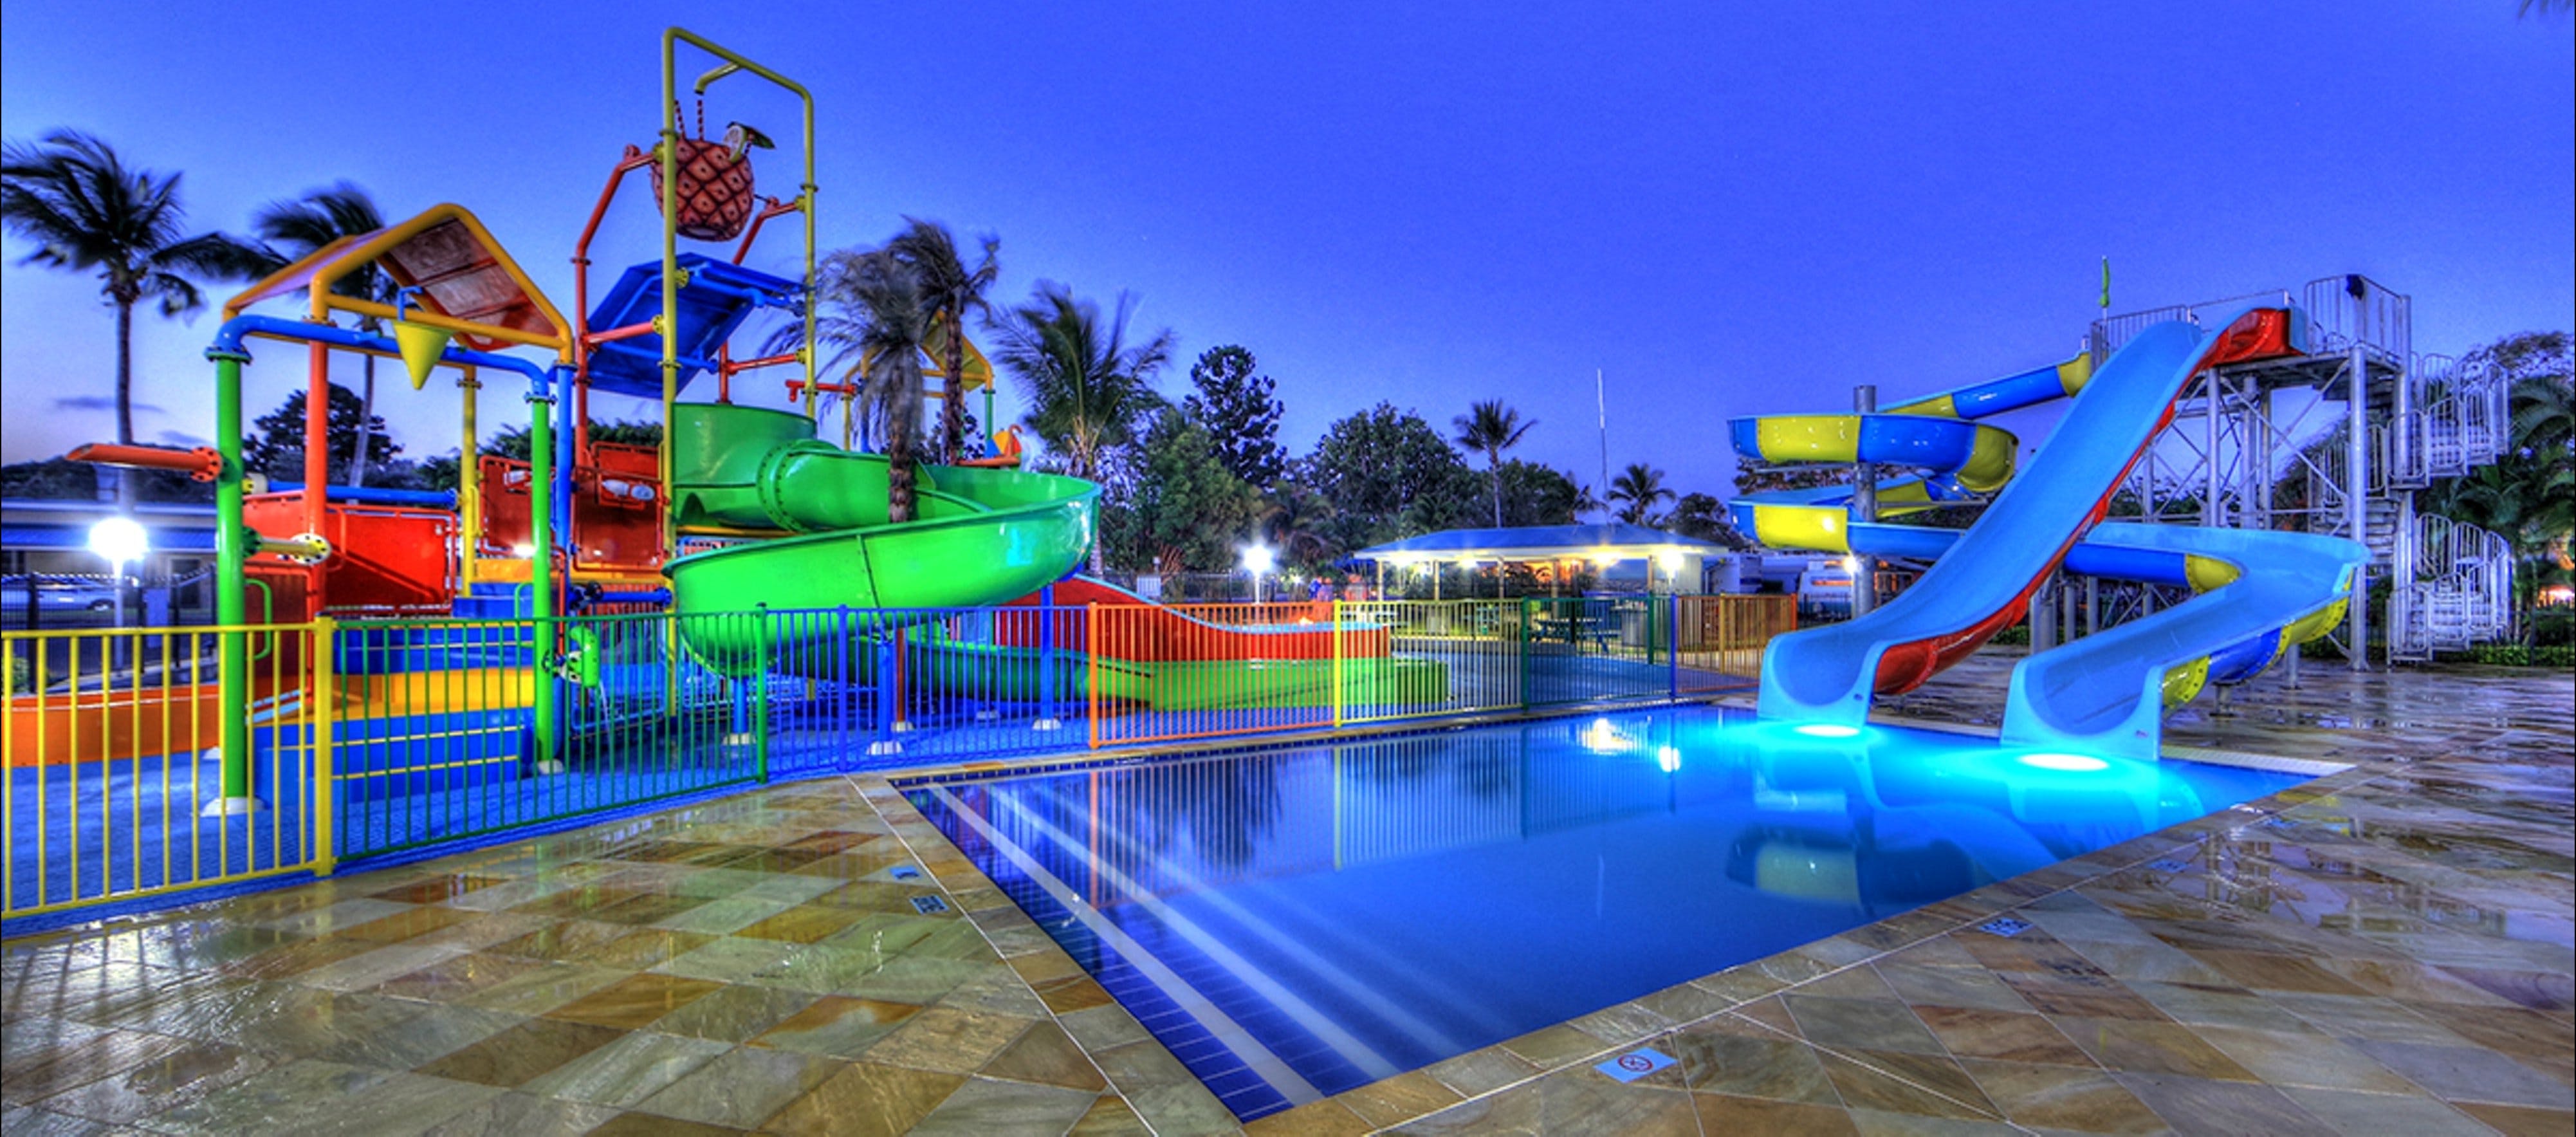 Discovery Parks - Coolwaters Yeppoon - Surfers Gold Coast